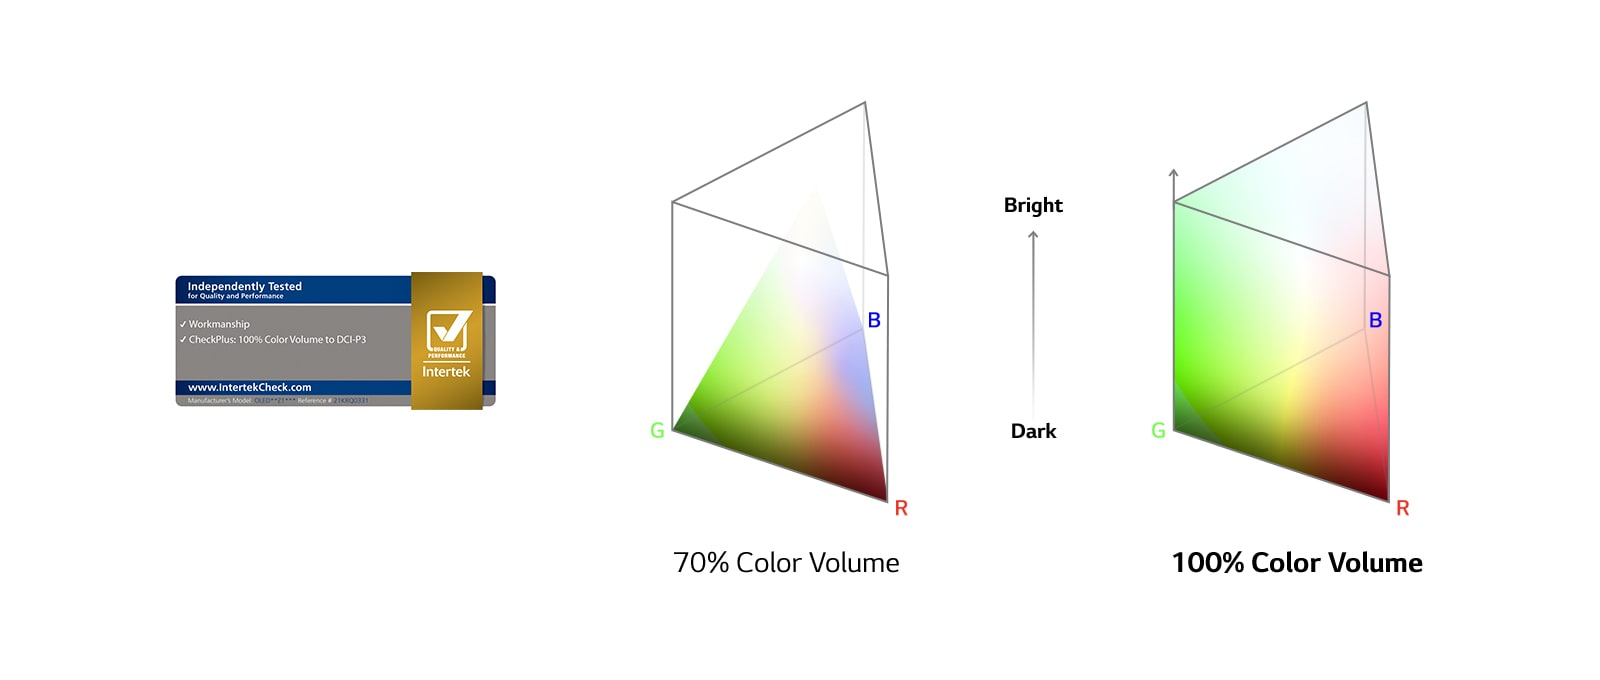 "A 100% Color Volume logo certified by Intertek. A comparison graph between 70% Color Volume and 100% Color Volume."